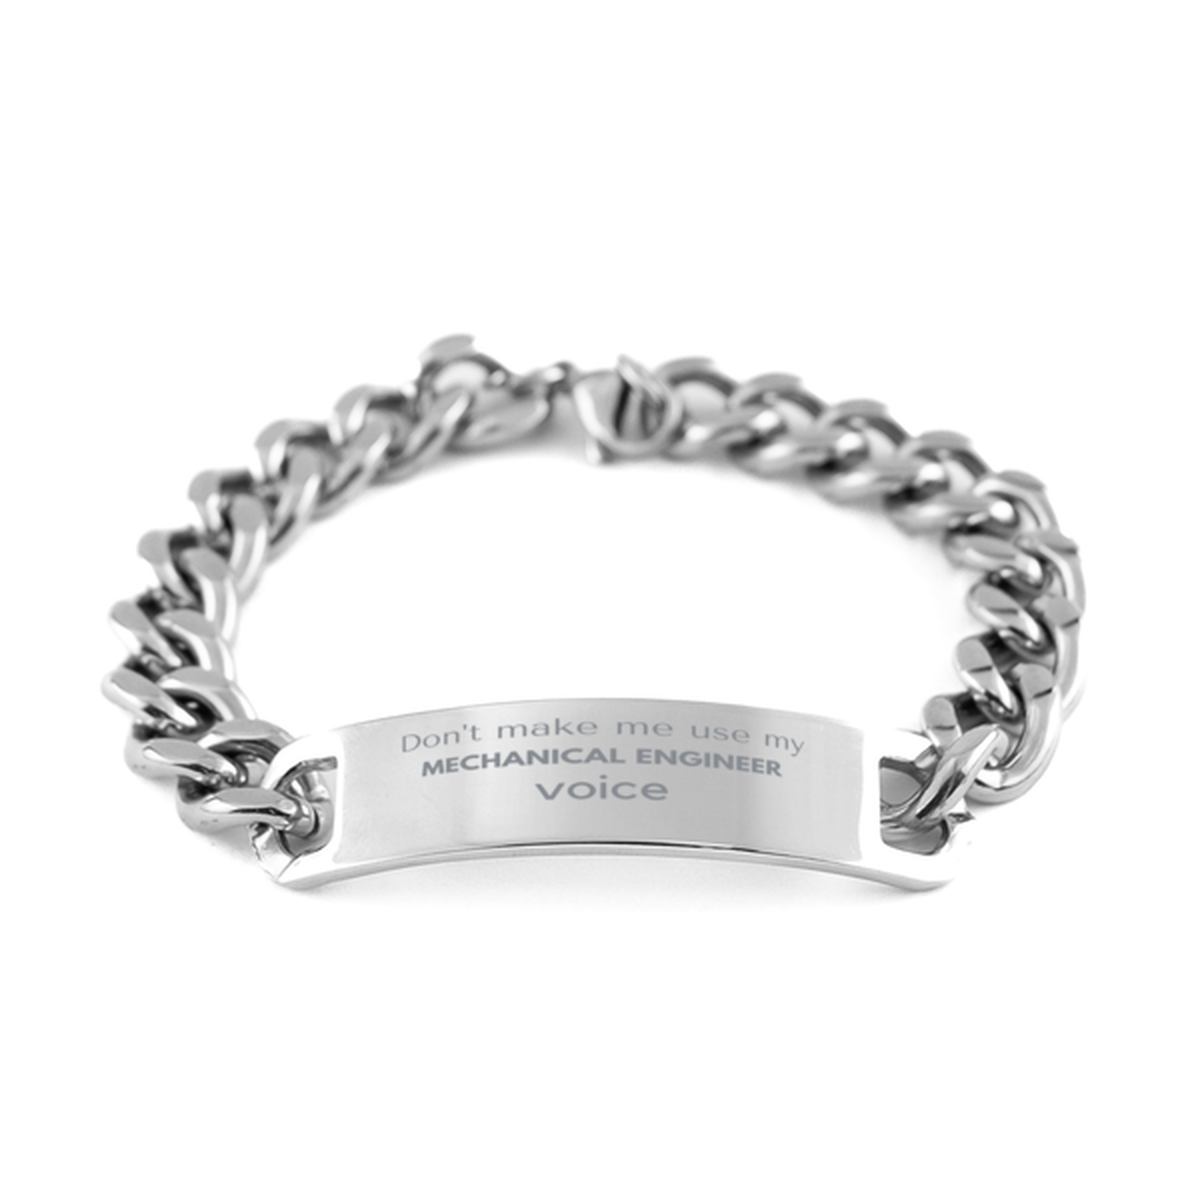 Don't make me use my Mechanical Engineer voice, Sarcasm Mechanical Engineer Gifts, Christmas Mechanical Engineer Cuban Chain Stainless Steel Bracelet Birthday Unique Gifts For Mechanical Engineer Coworkers, Men, Women, Colleague, Friends